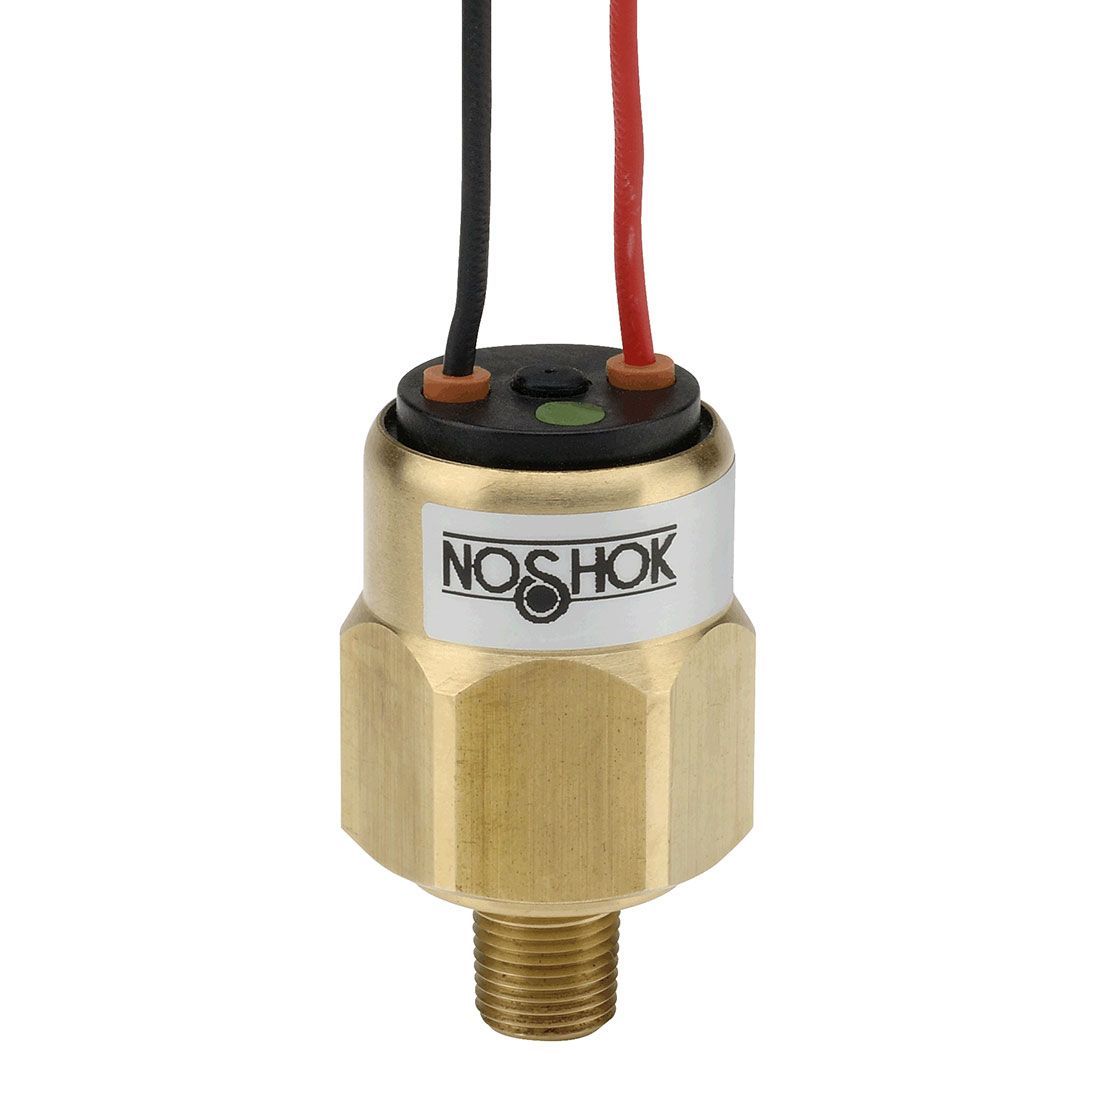 200V Series Snap Action Switch, Brass Wetted Materials, BUNA-N Diaphragm, 1 SPDT, NO / NC, 1/8" NPT Male, -5 inHg to -25 inHg (350 psig), 18" Flying Leads